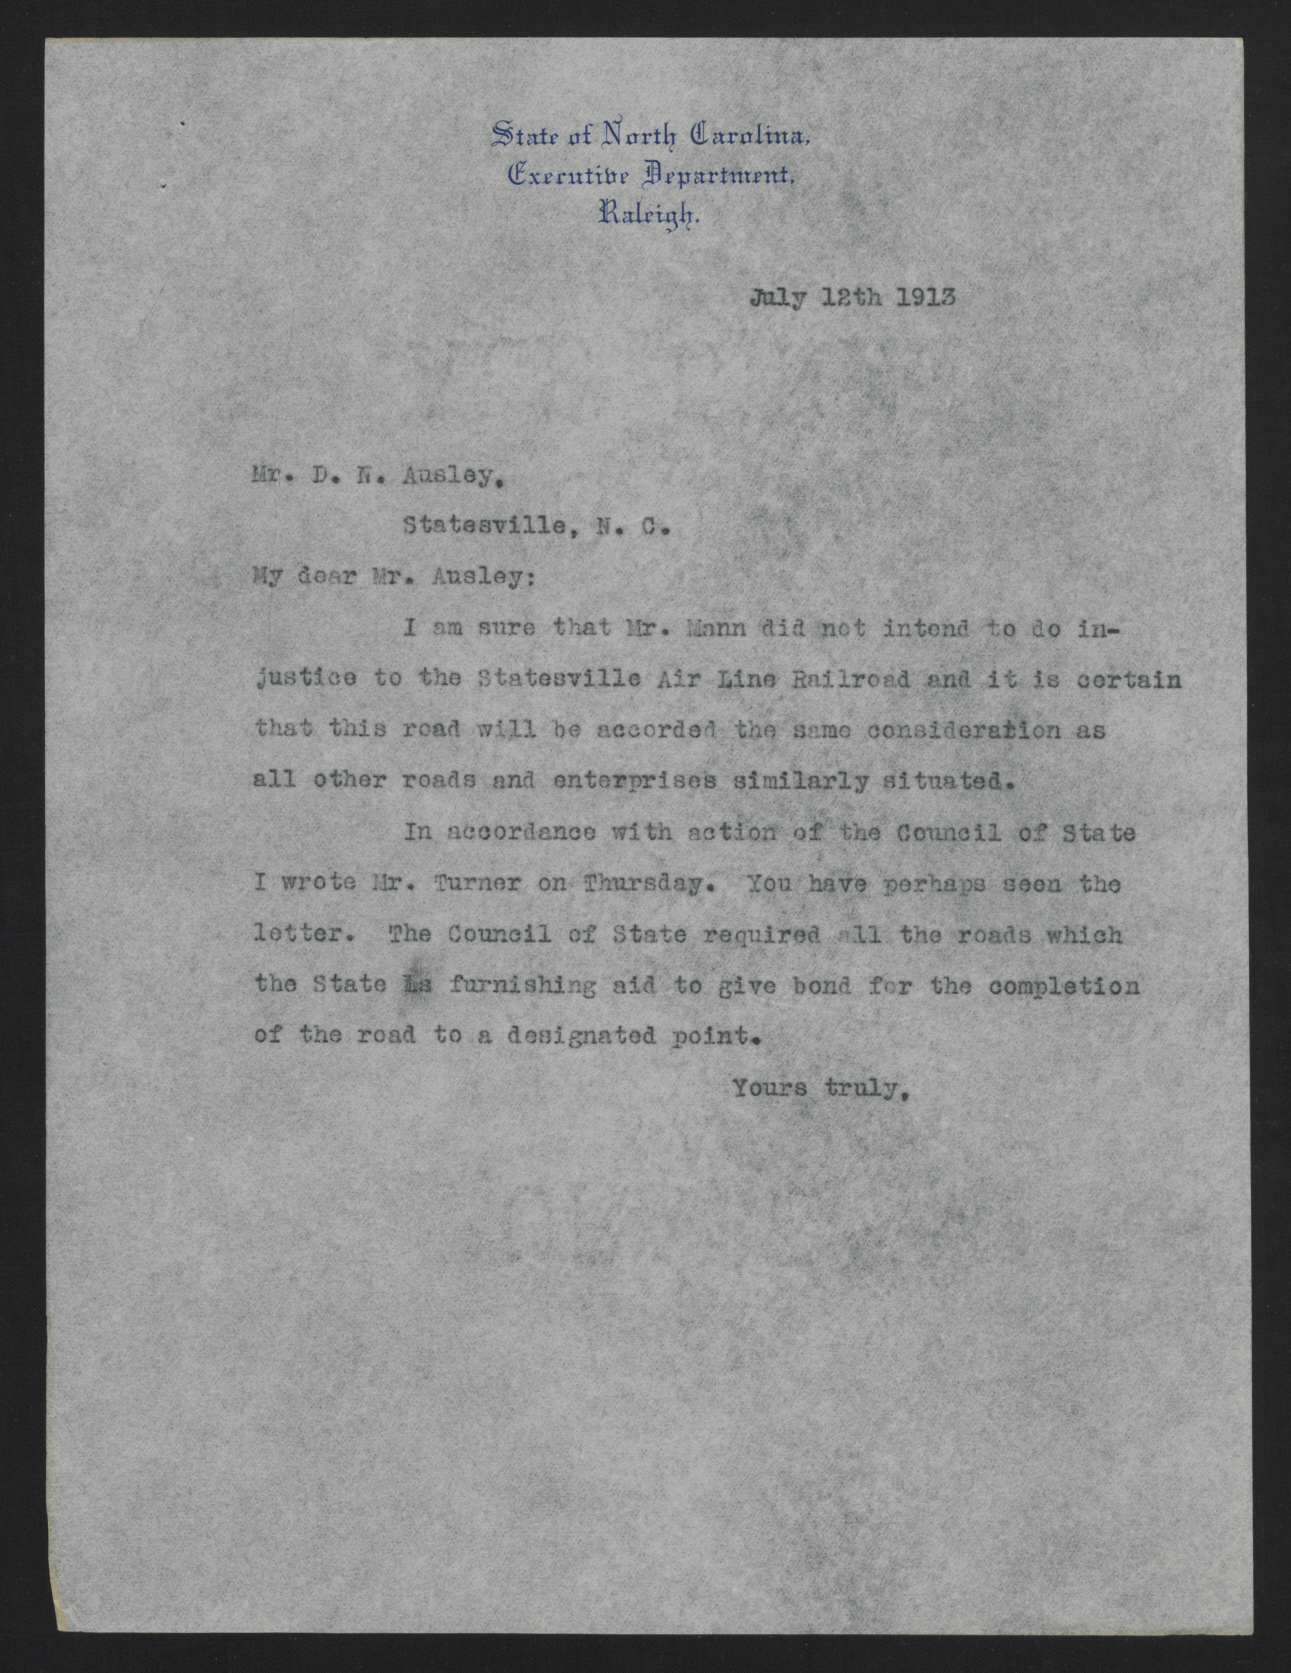 Letter from Craig to Ausley, July 12, 1913